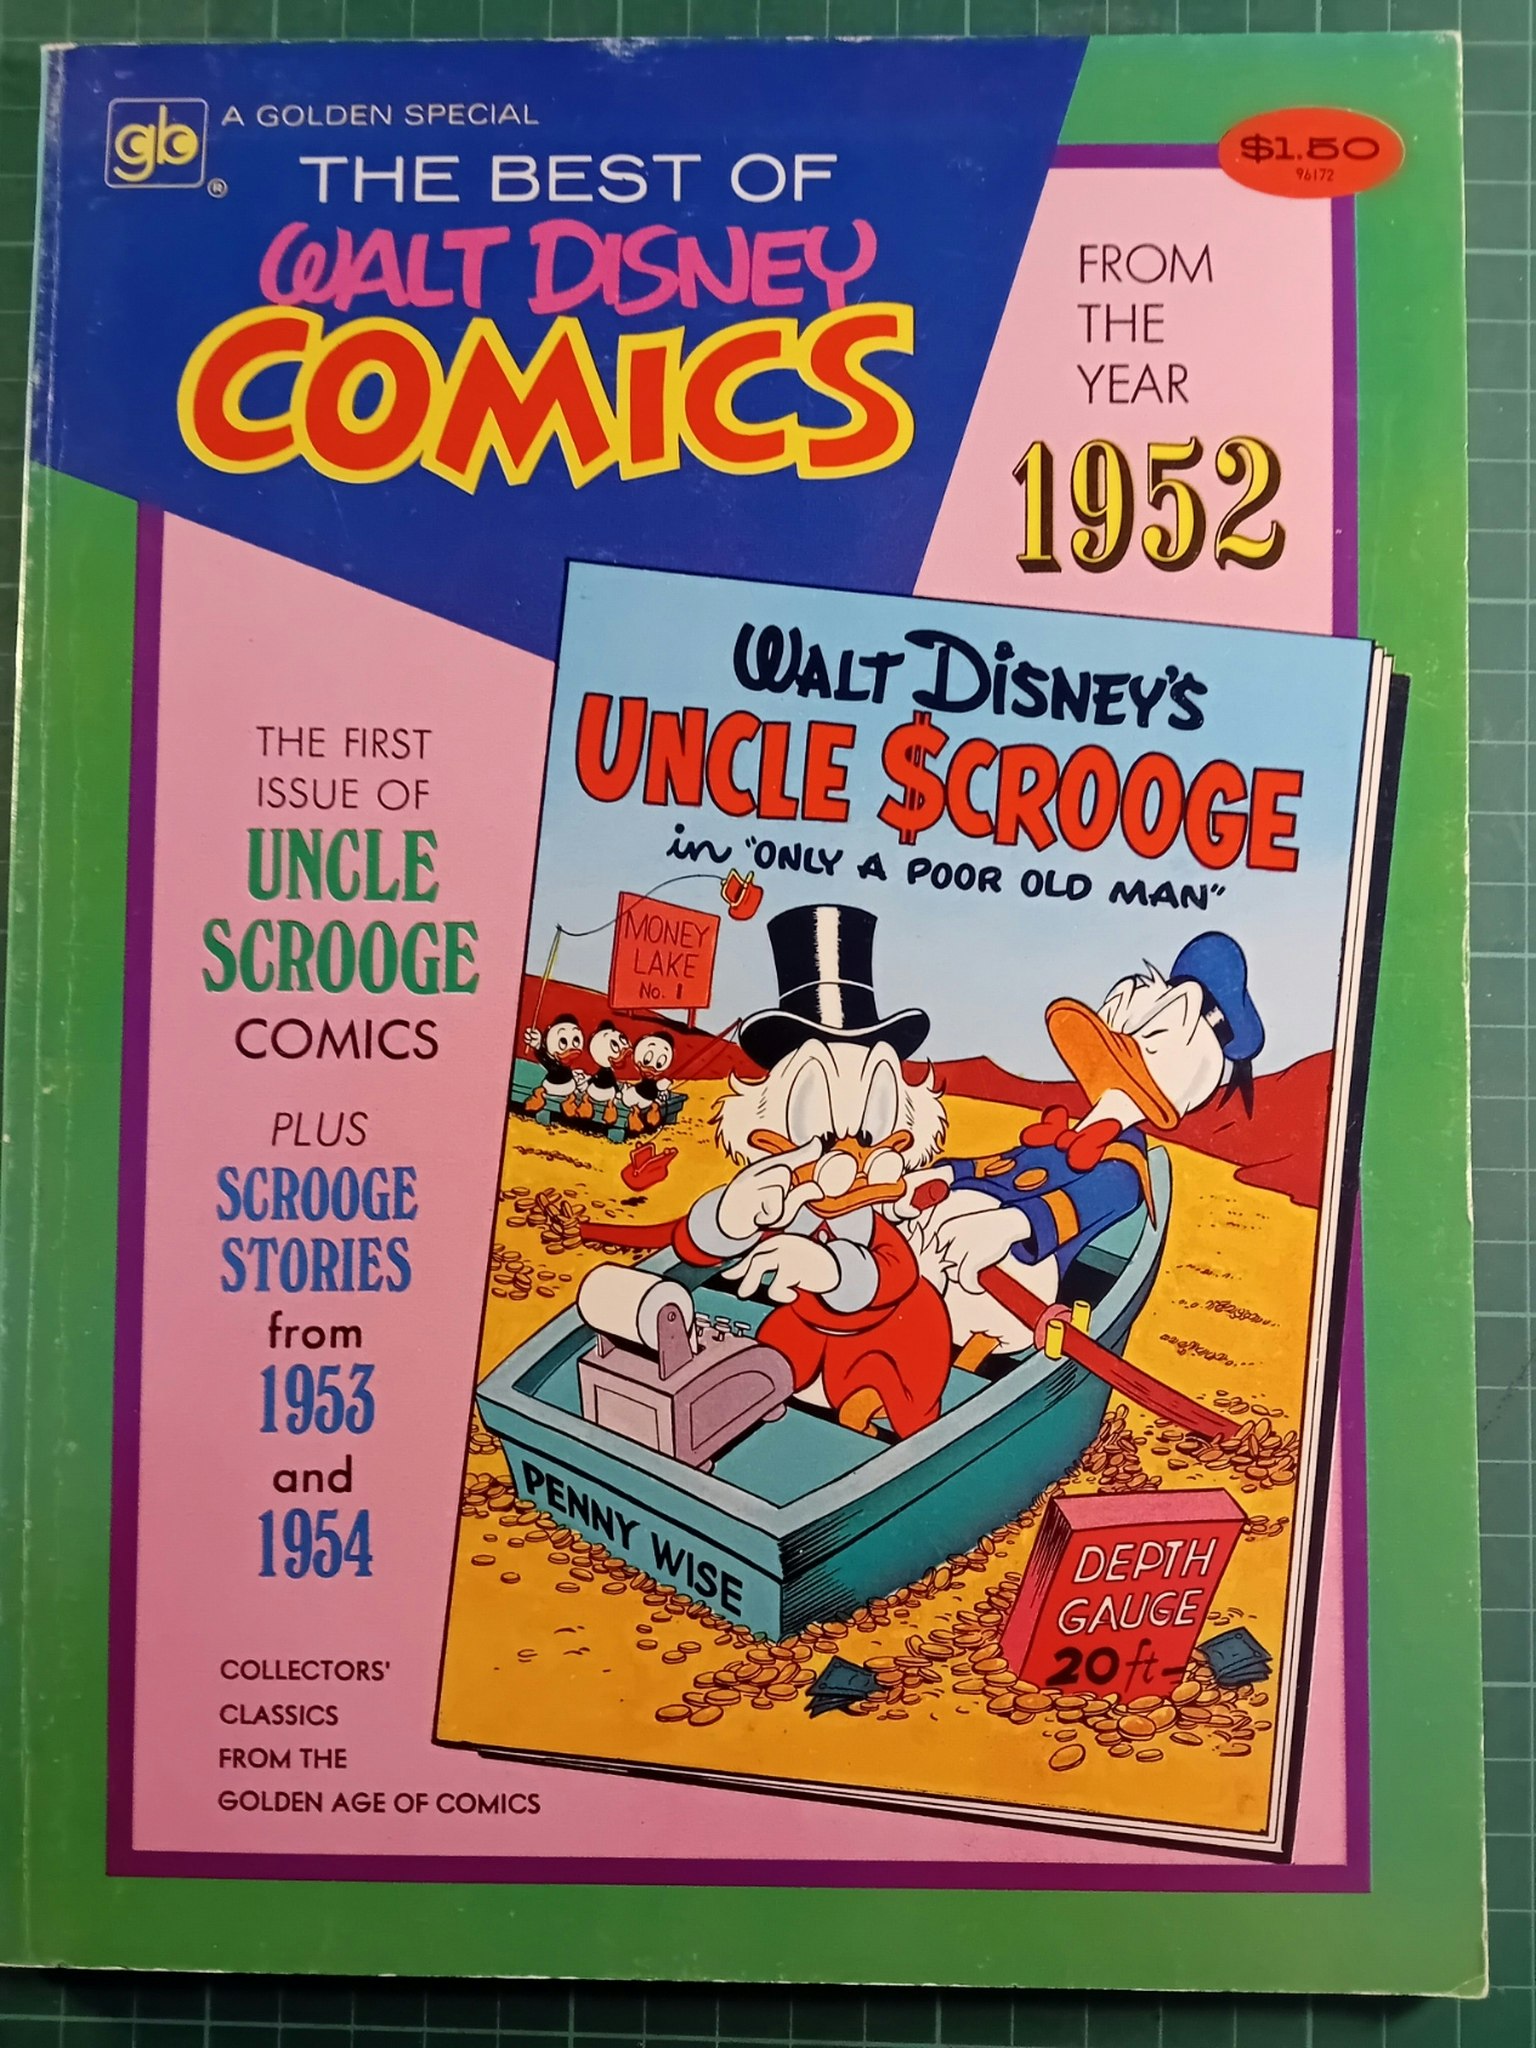 The best of Walt Disney comic from the year 1952 (USA)